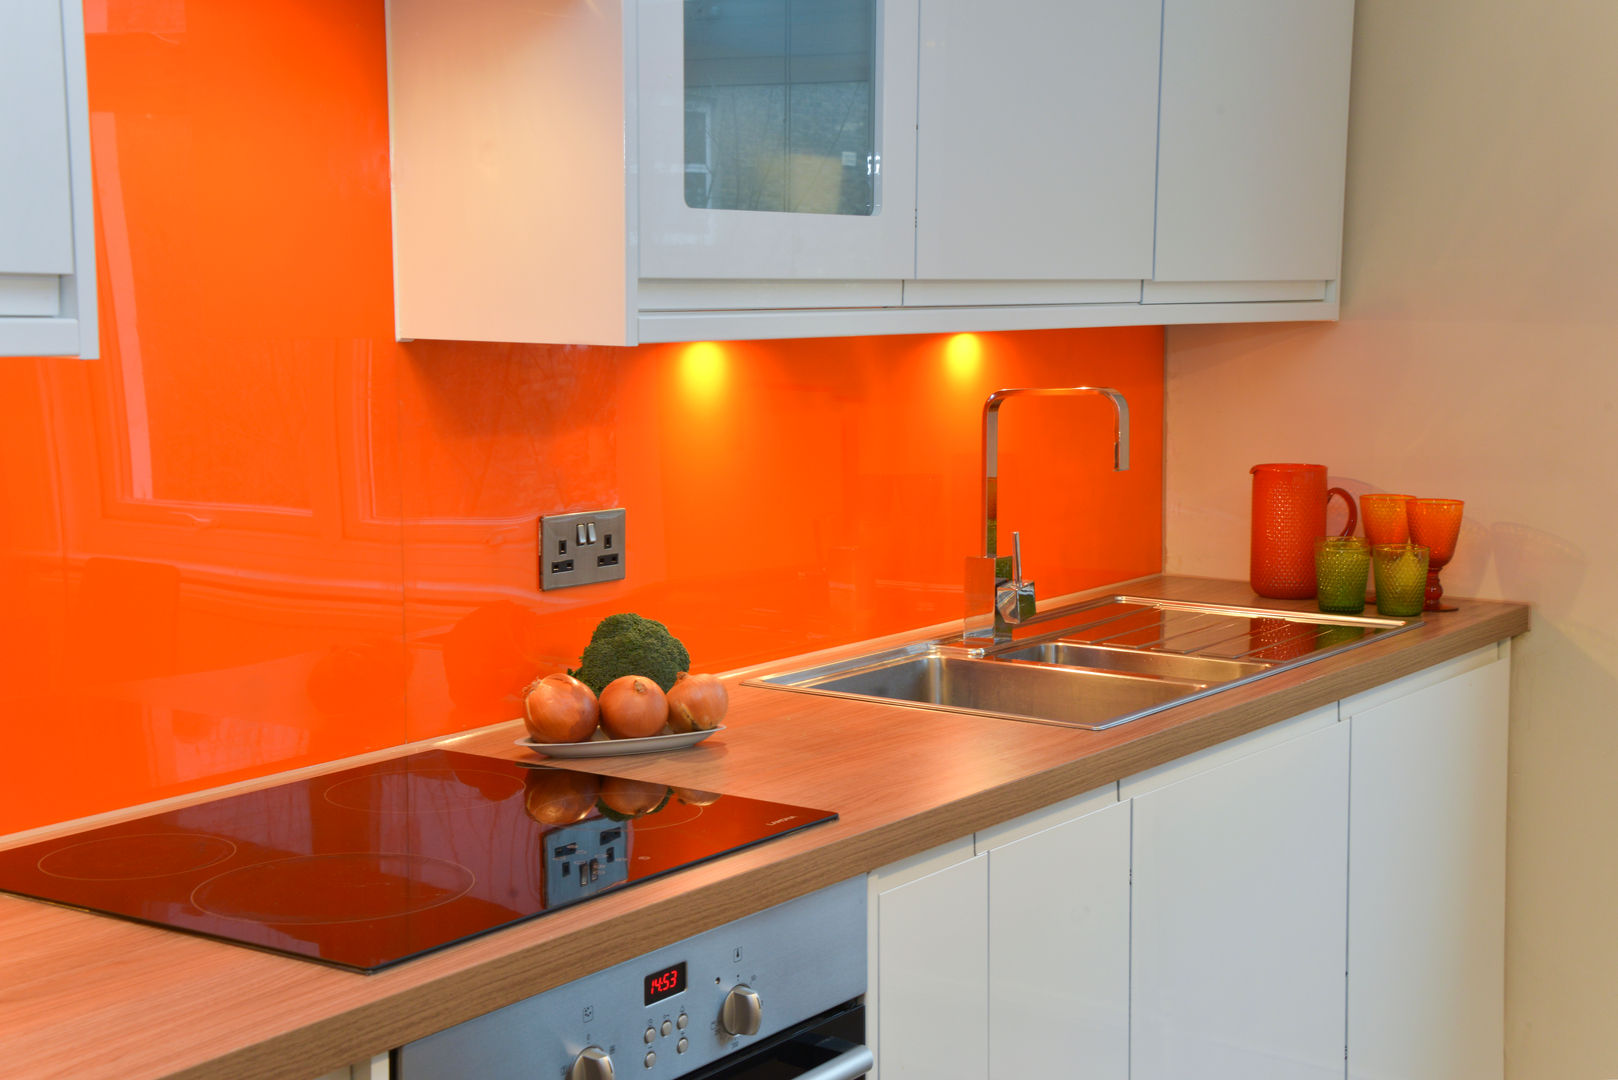 A Bright and Breezy Kitchen, Cathy Phillips & Co Cathy Phillips & Co Kitchen